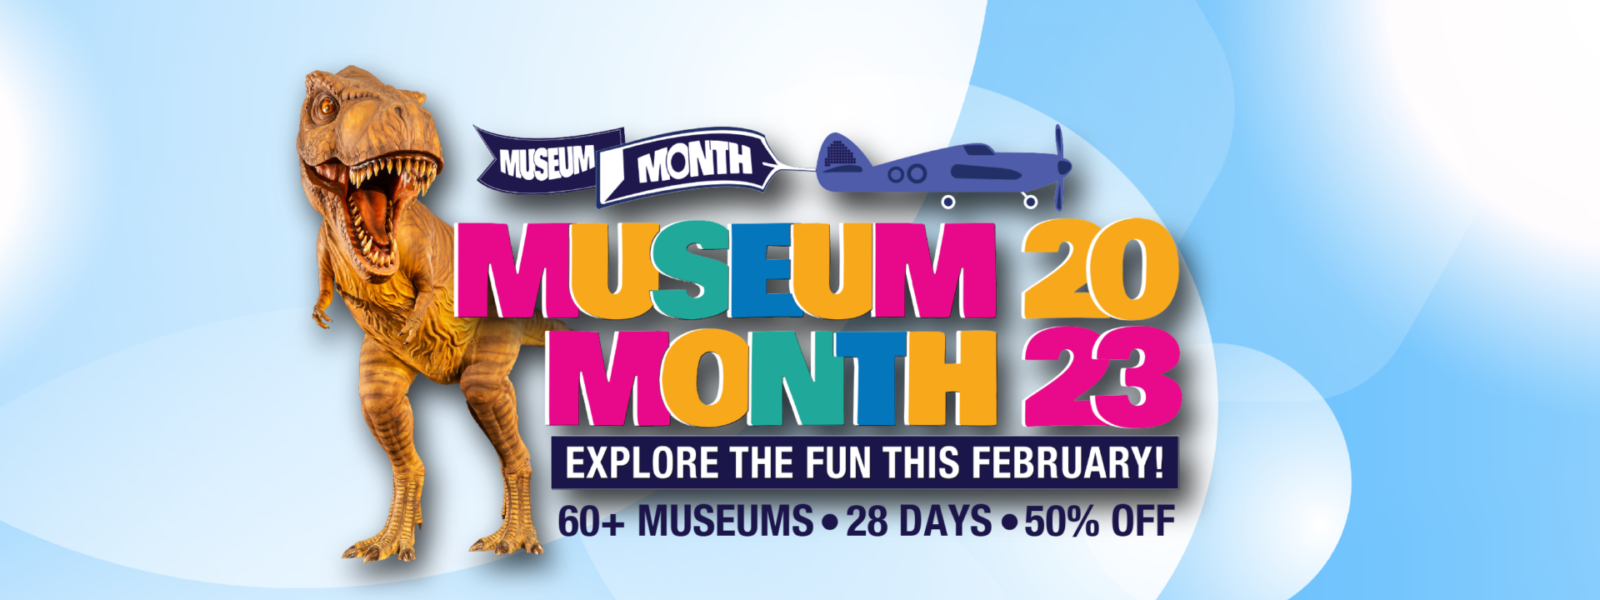 Link to Museum Month 2023 website.